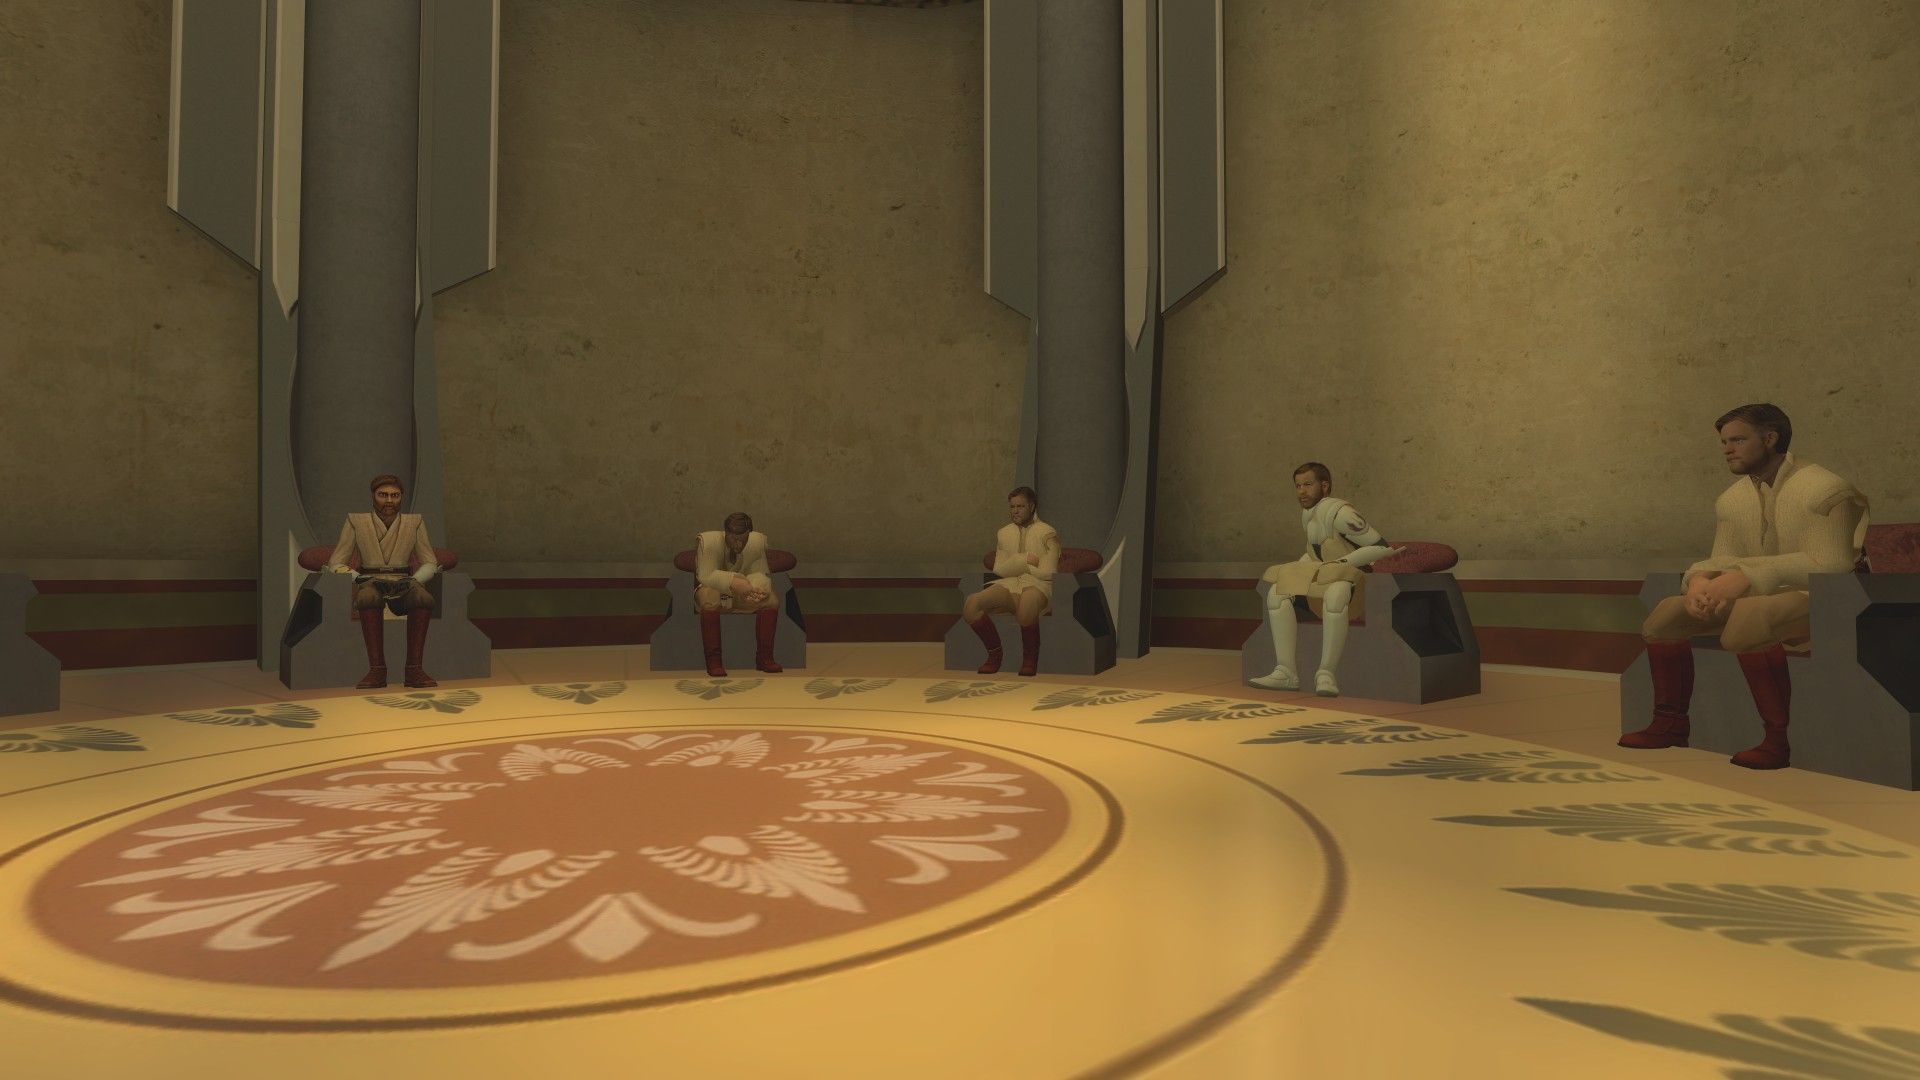 The perfect Jedi council doesn't exis